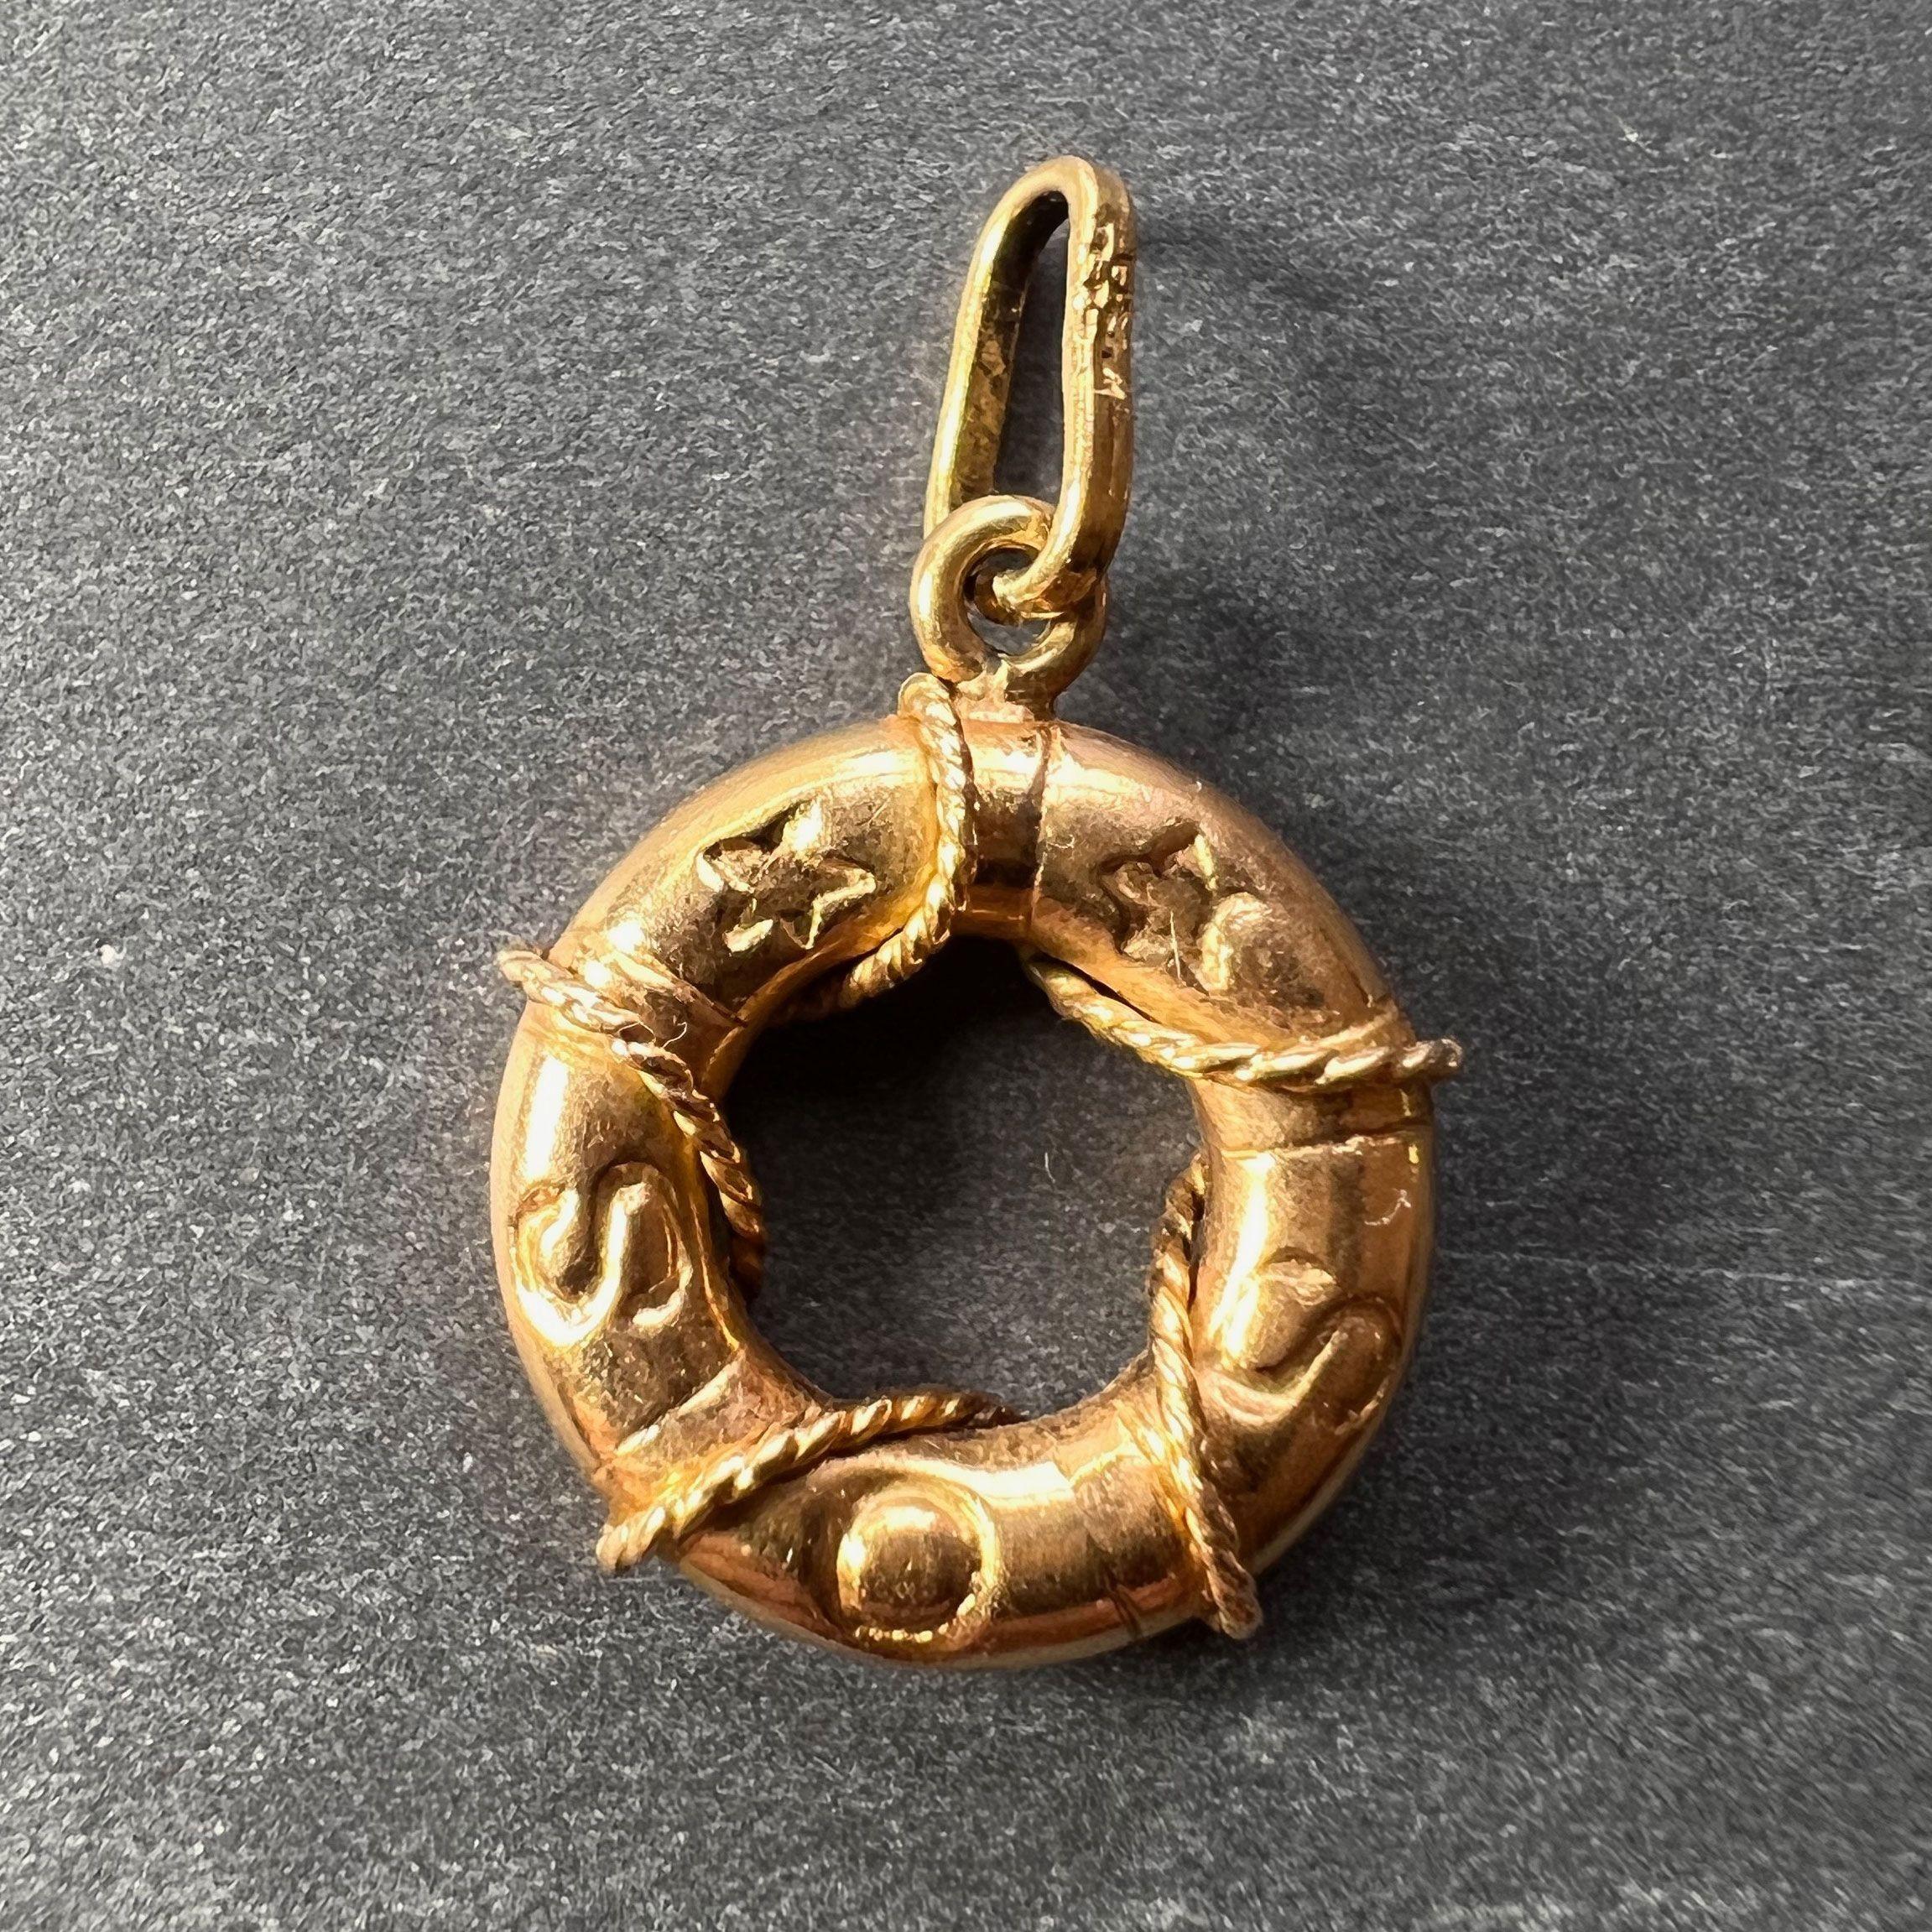 An 18 karat (18K) yellow gold charm pendant designed as a life preserver or buoy wrapped with rope and marked SOS. Stamped 750 for 18 karat gold to the jump ring.

Dimensions: 1.7 x 1.4 x 0.4 cm (not including jump ring)
Weight: 1.50 grams